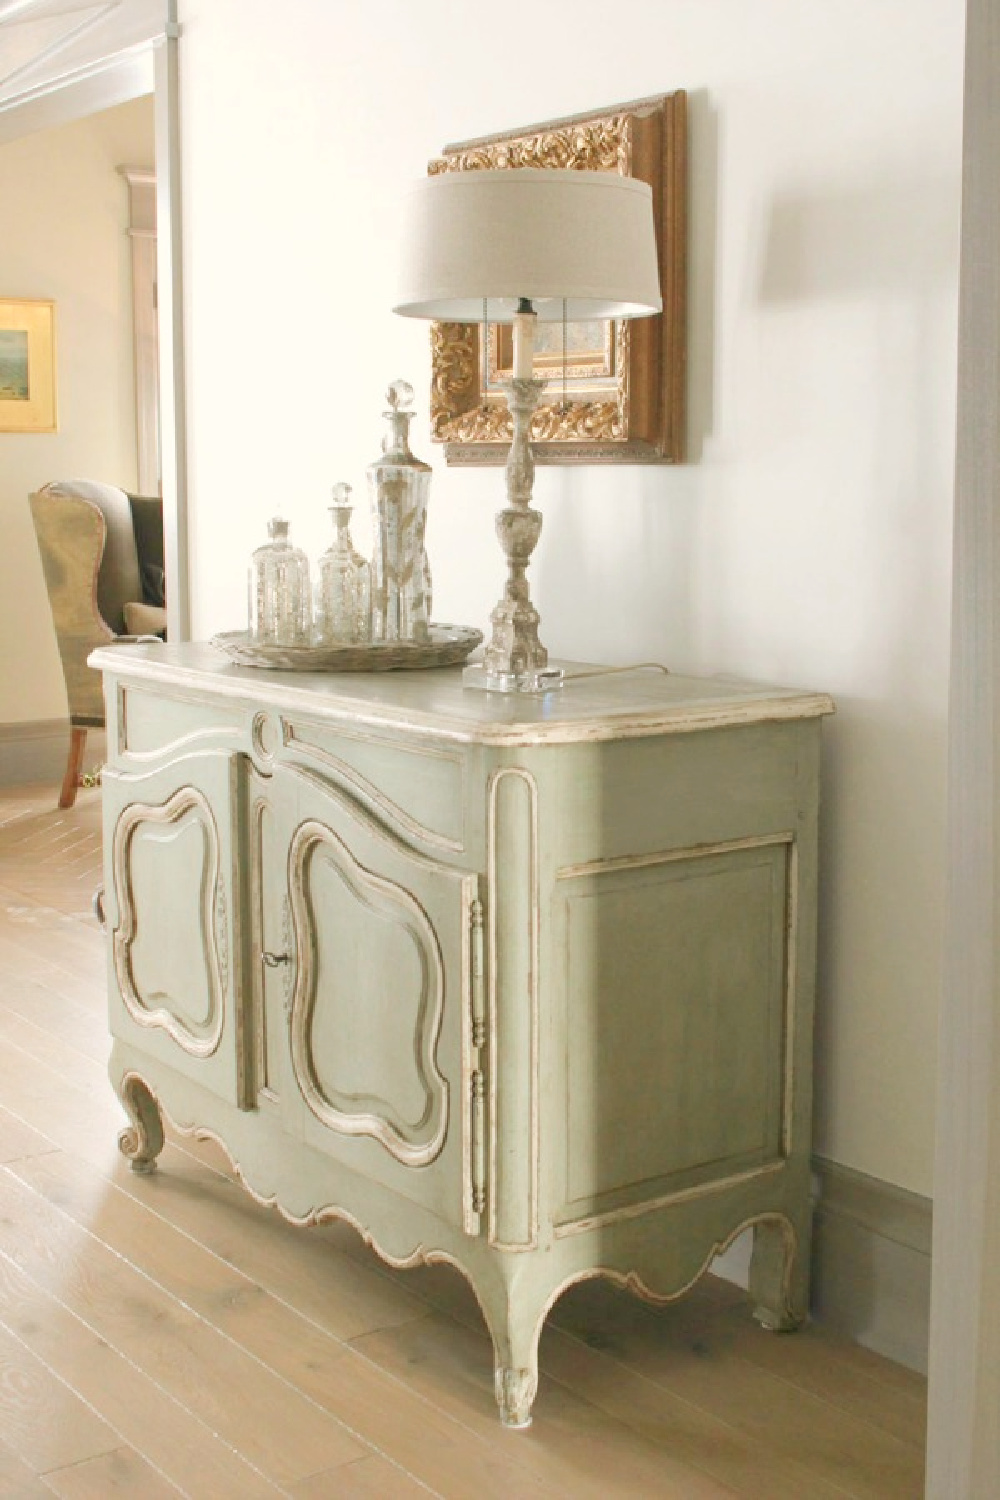 Beautiful French console in rustically elegant European country cottage - Desiree of Beljar Home and DecordeProvence. #europeancountry #cottagestyleinteriors